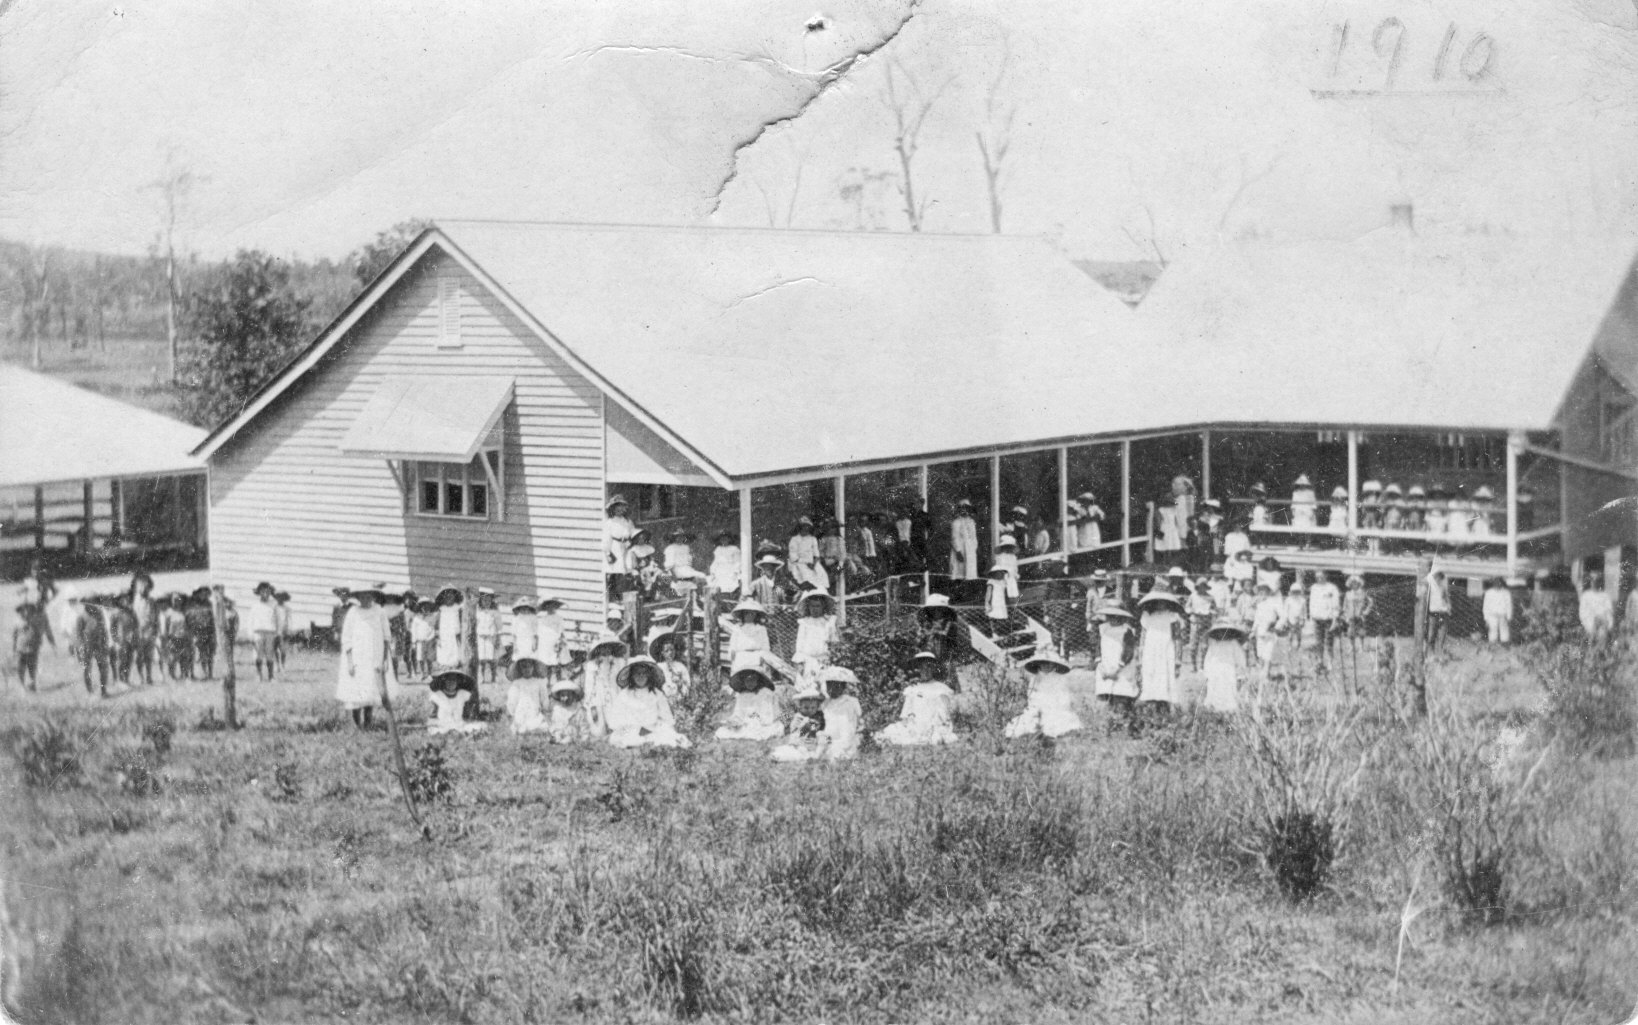 The first Marburg School firstly named Frederick, and earlier Sally Owen's Plains. These buildings were moved in the early 1920,s to the present site. A new school building was erected and the old ones used for the Boys and Girls Rural School, opening in 1922. The second in Queensland, the first was at Nambour. 